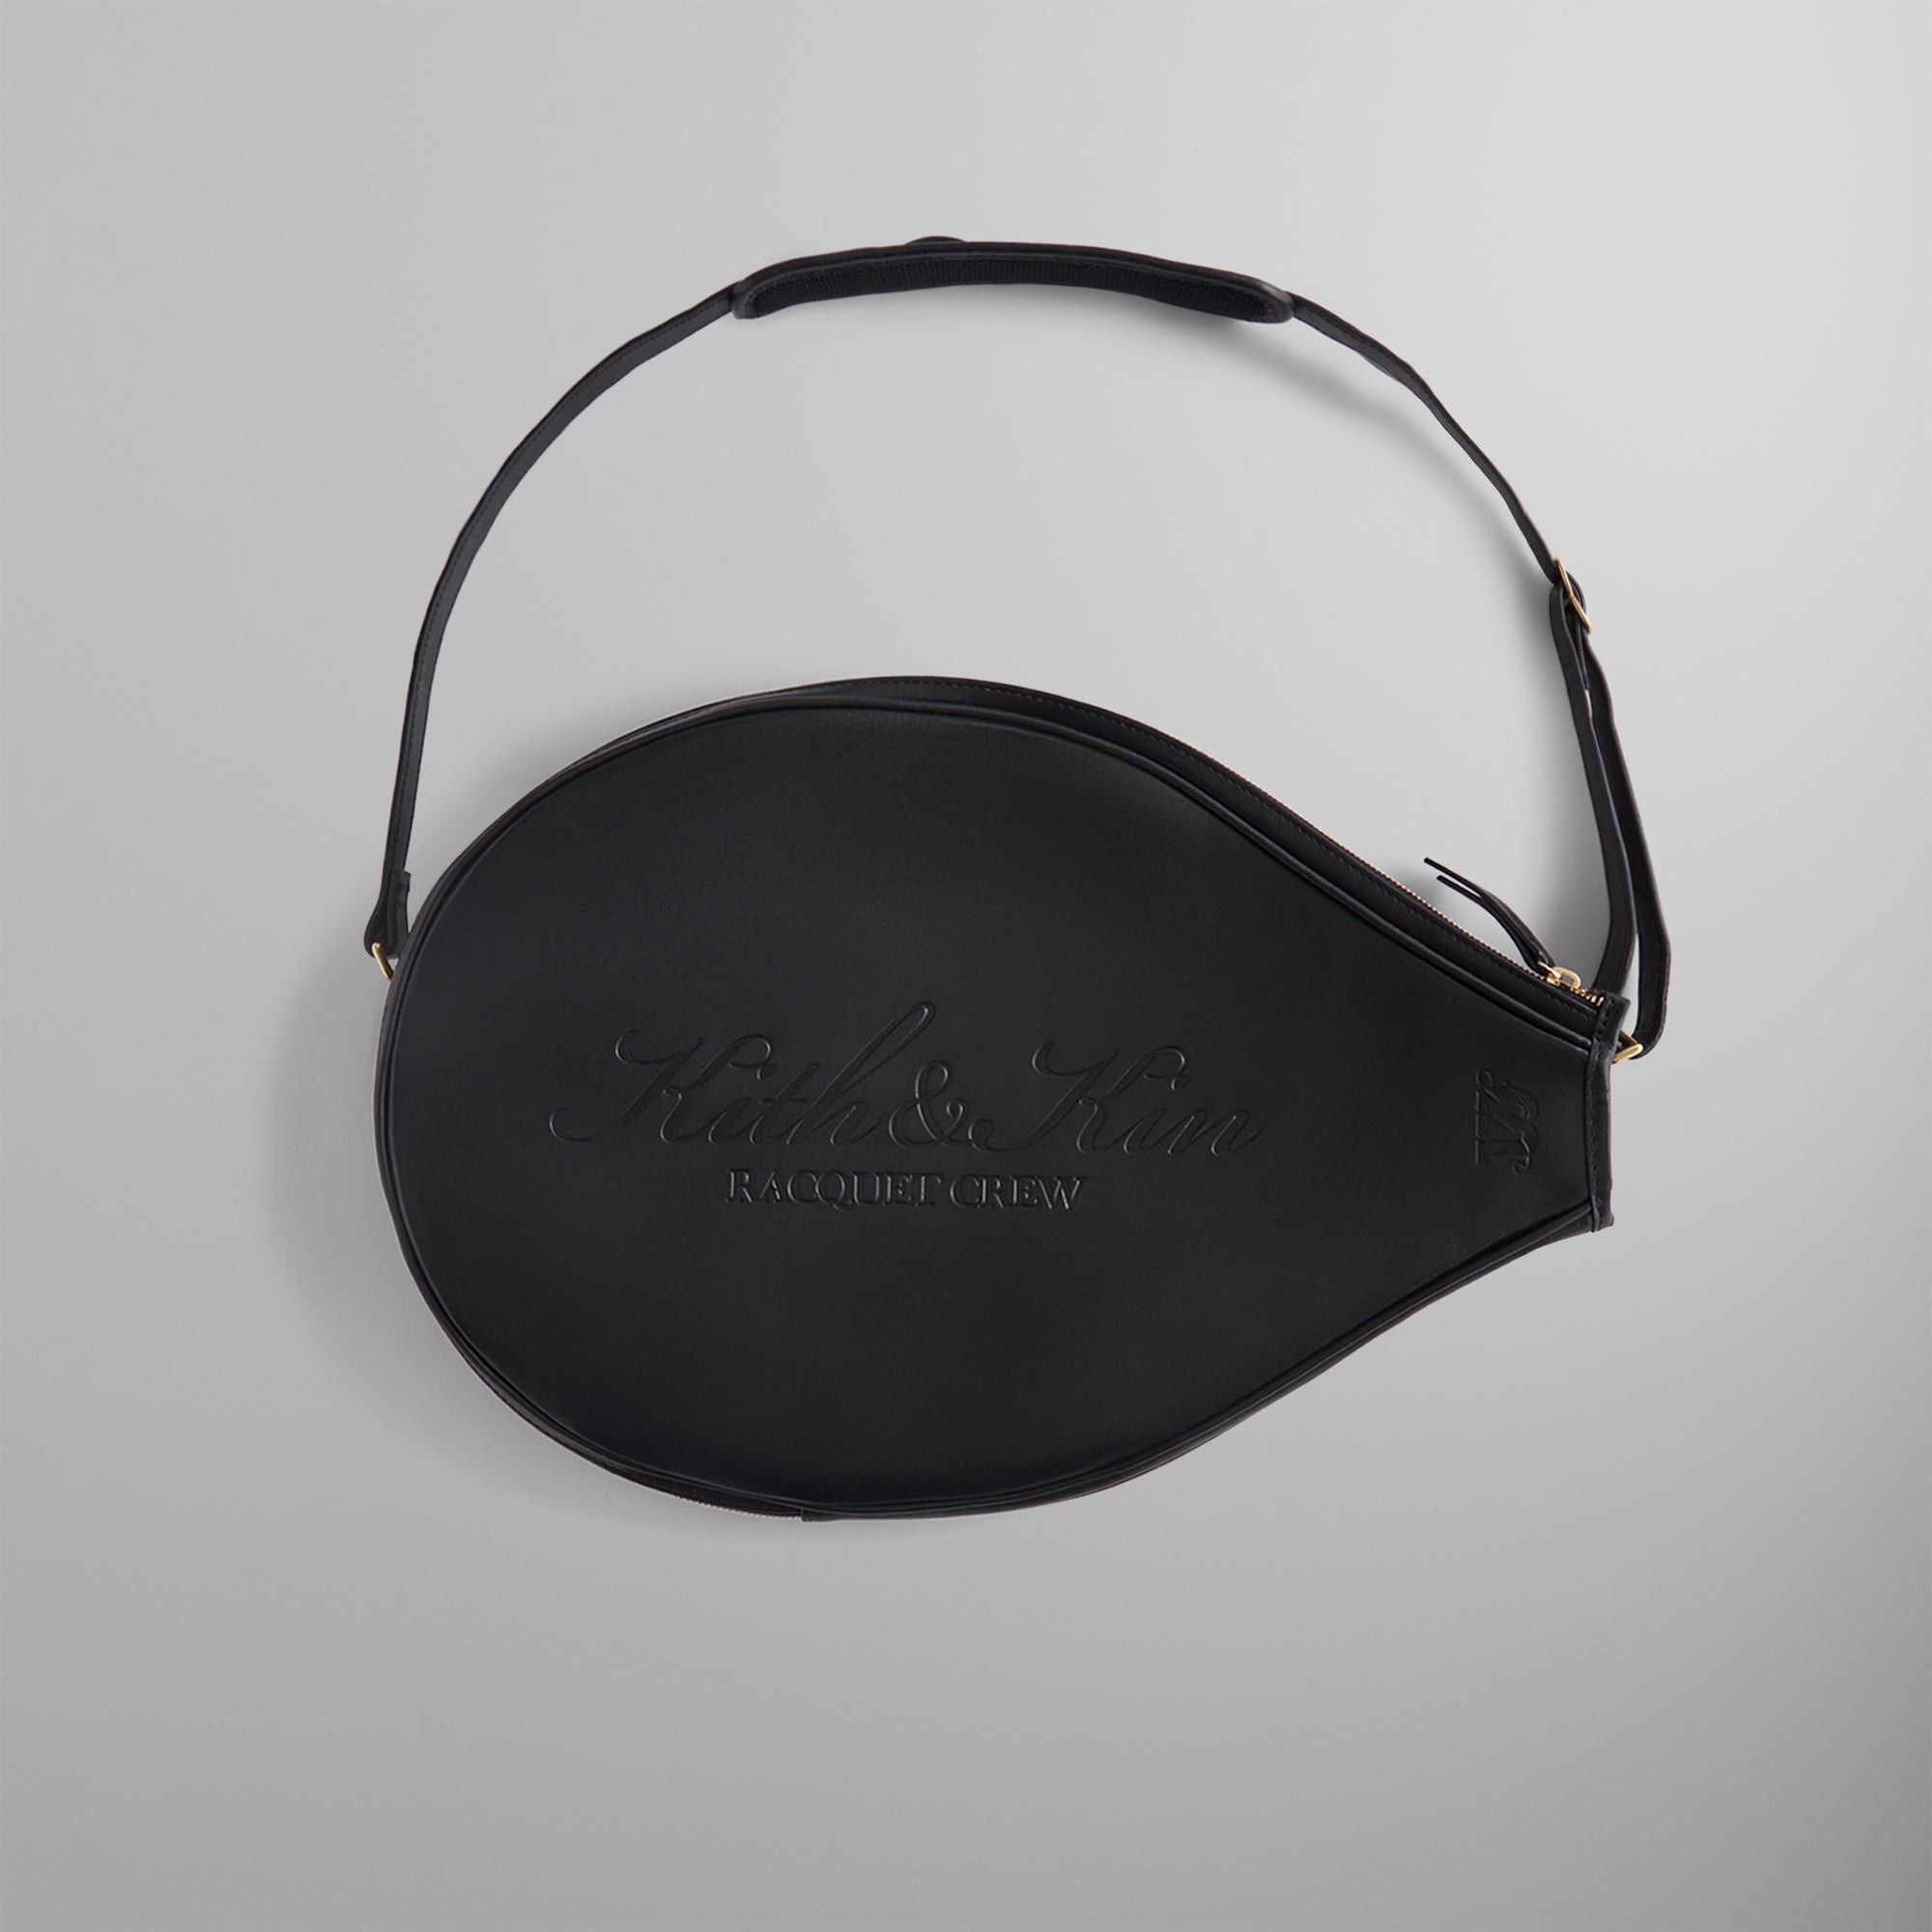 Kith for Wilson Retro Leather Racket Cover - Black